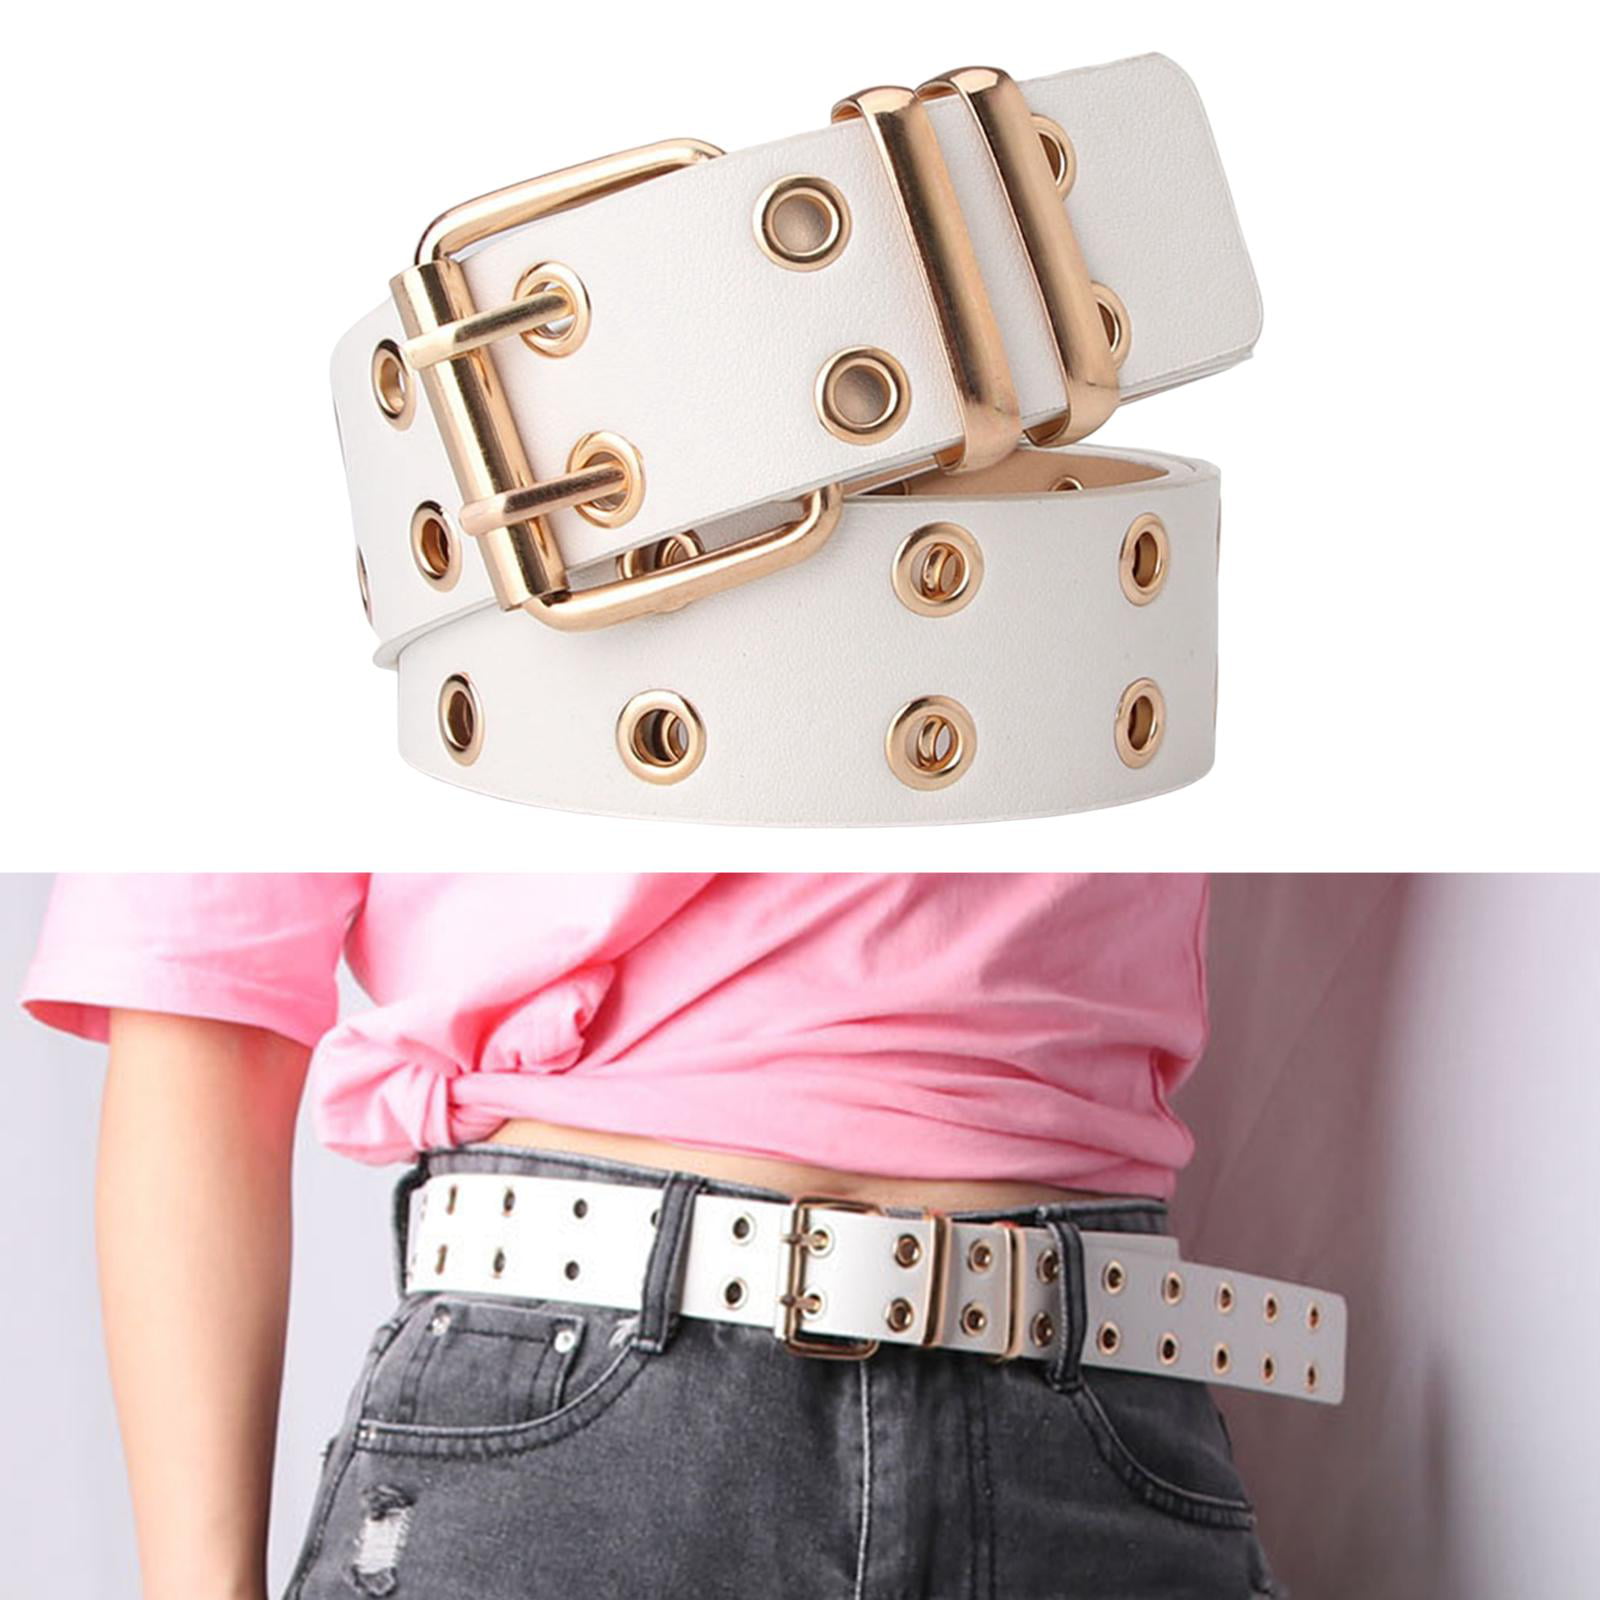 Hollow Accessories, Leather for Gothic White Punk PU Pants , Fashion Double Grommet Vintage Adjustable Eyelet Jeans. Belt, with